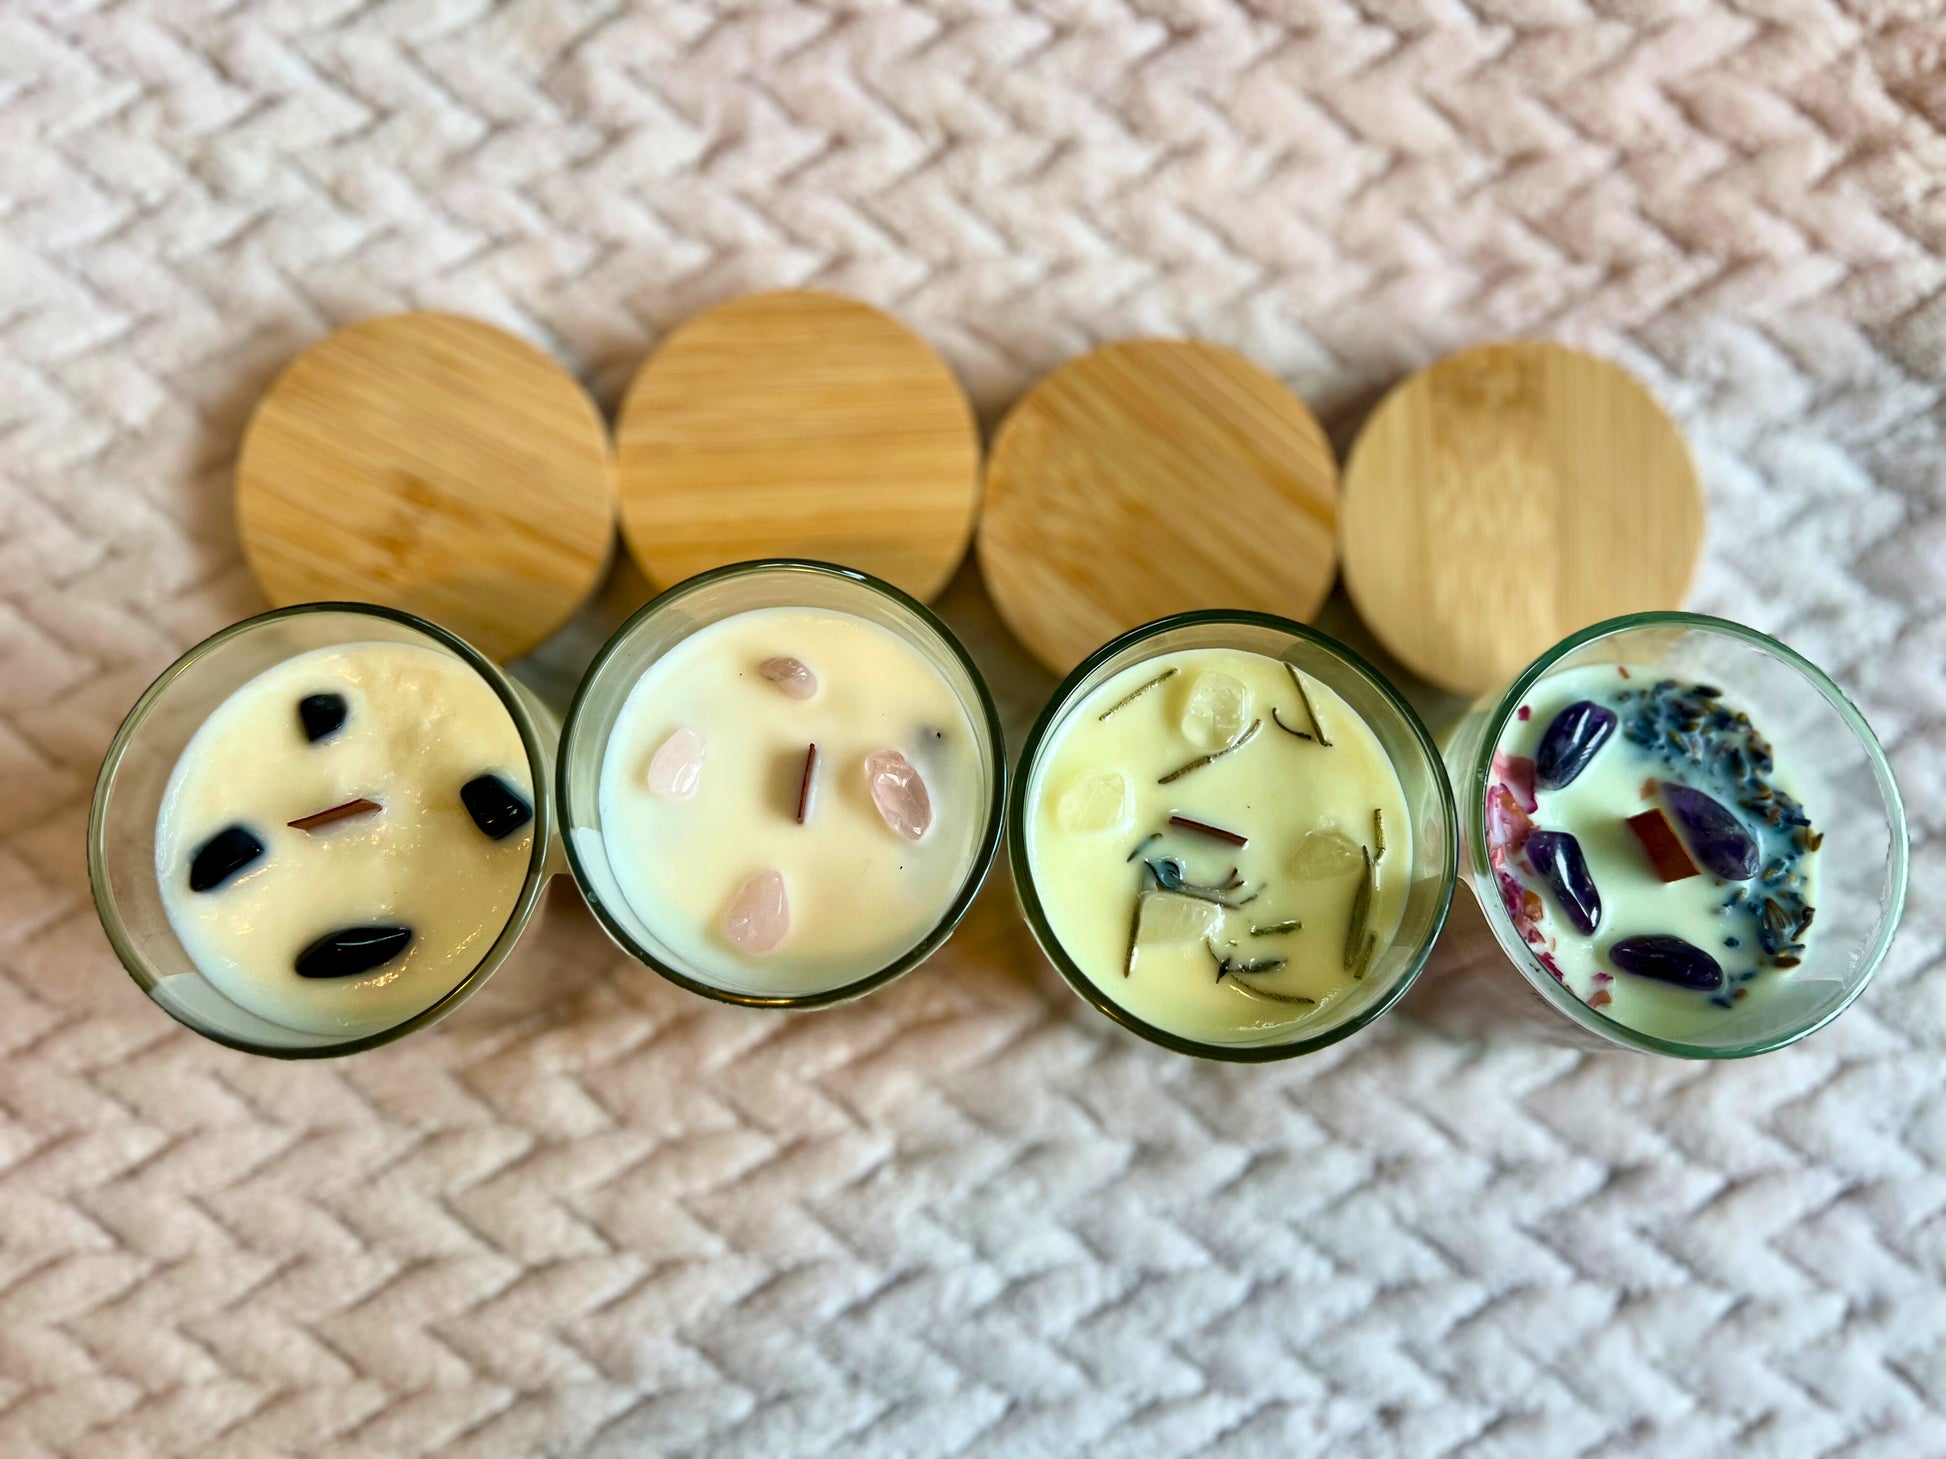 Moon Phases candles, kit with 4 candles. Each candle has crystals for decoration. New Moon Candle, Waxing Moon Candle, Waning Moon Candle and Full Moon Candle